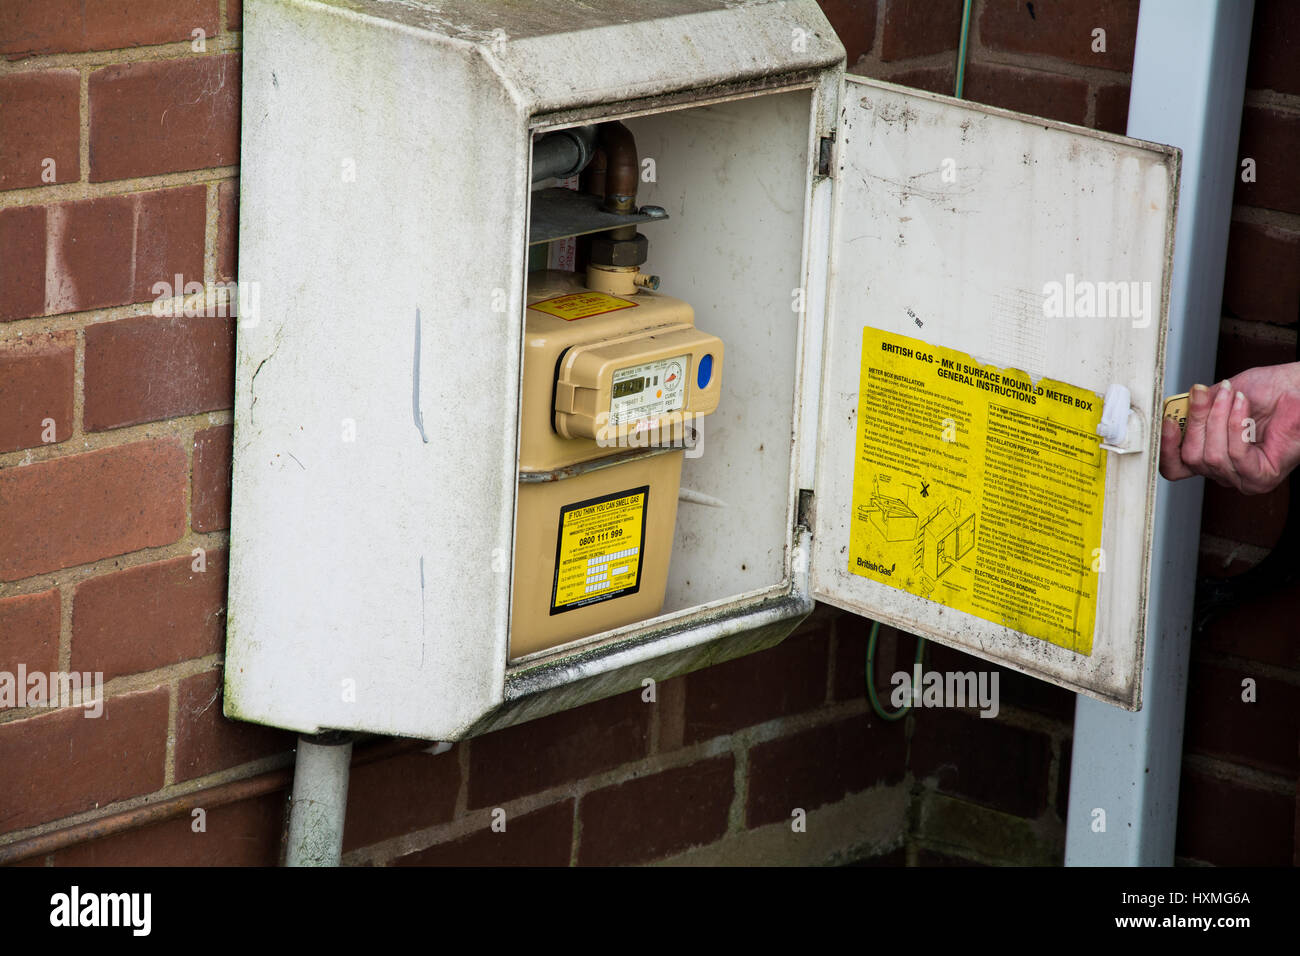 Taking a gas meter reading in the UK. Stock Photo